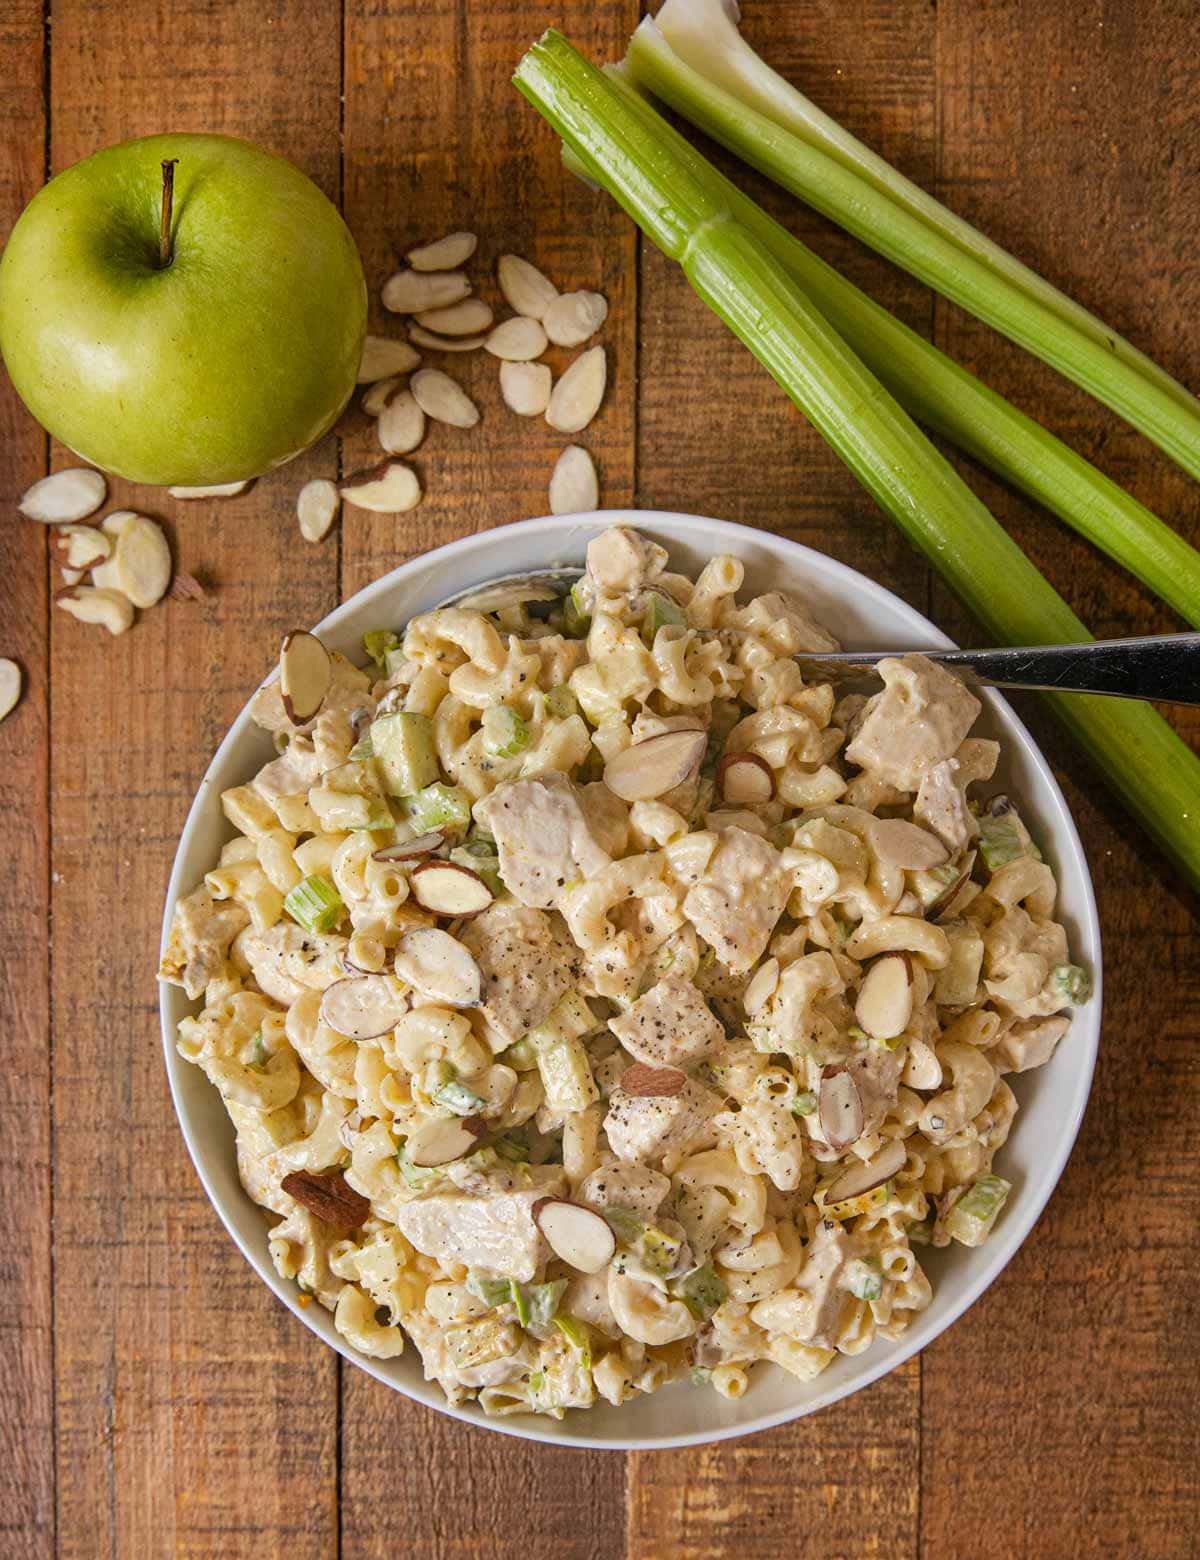 Curried Chicken Pasta Salad with apples and celery